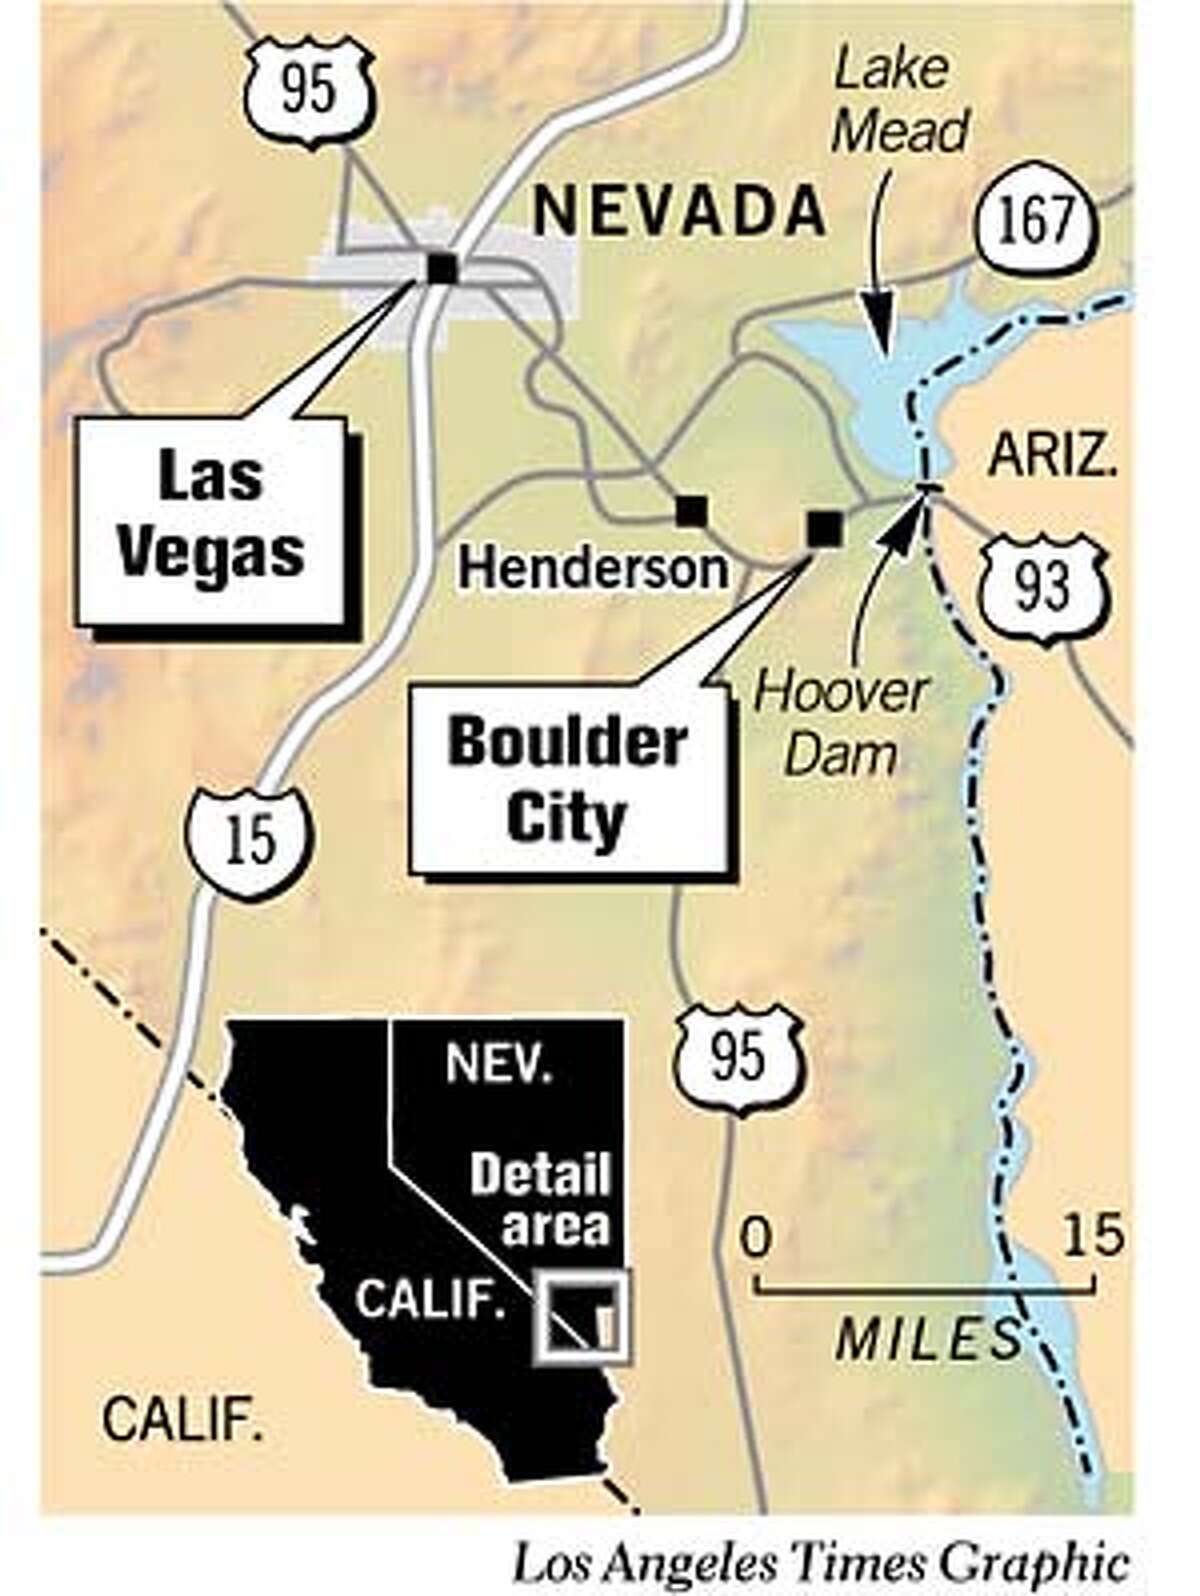 Planned town gives a dam / Boulder City a quiet, offbeat base for